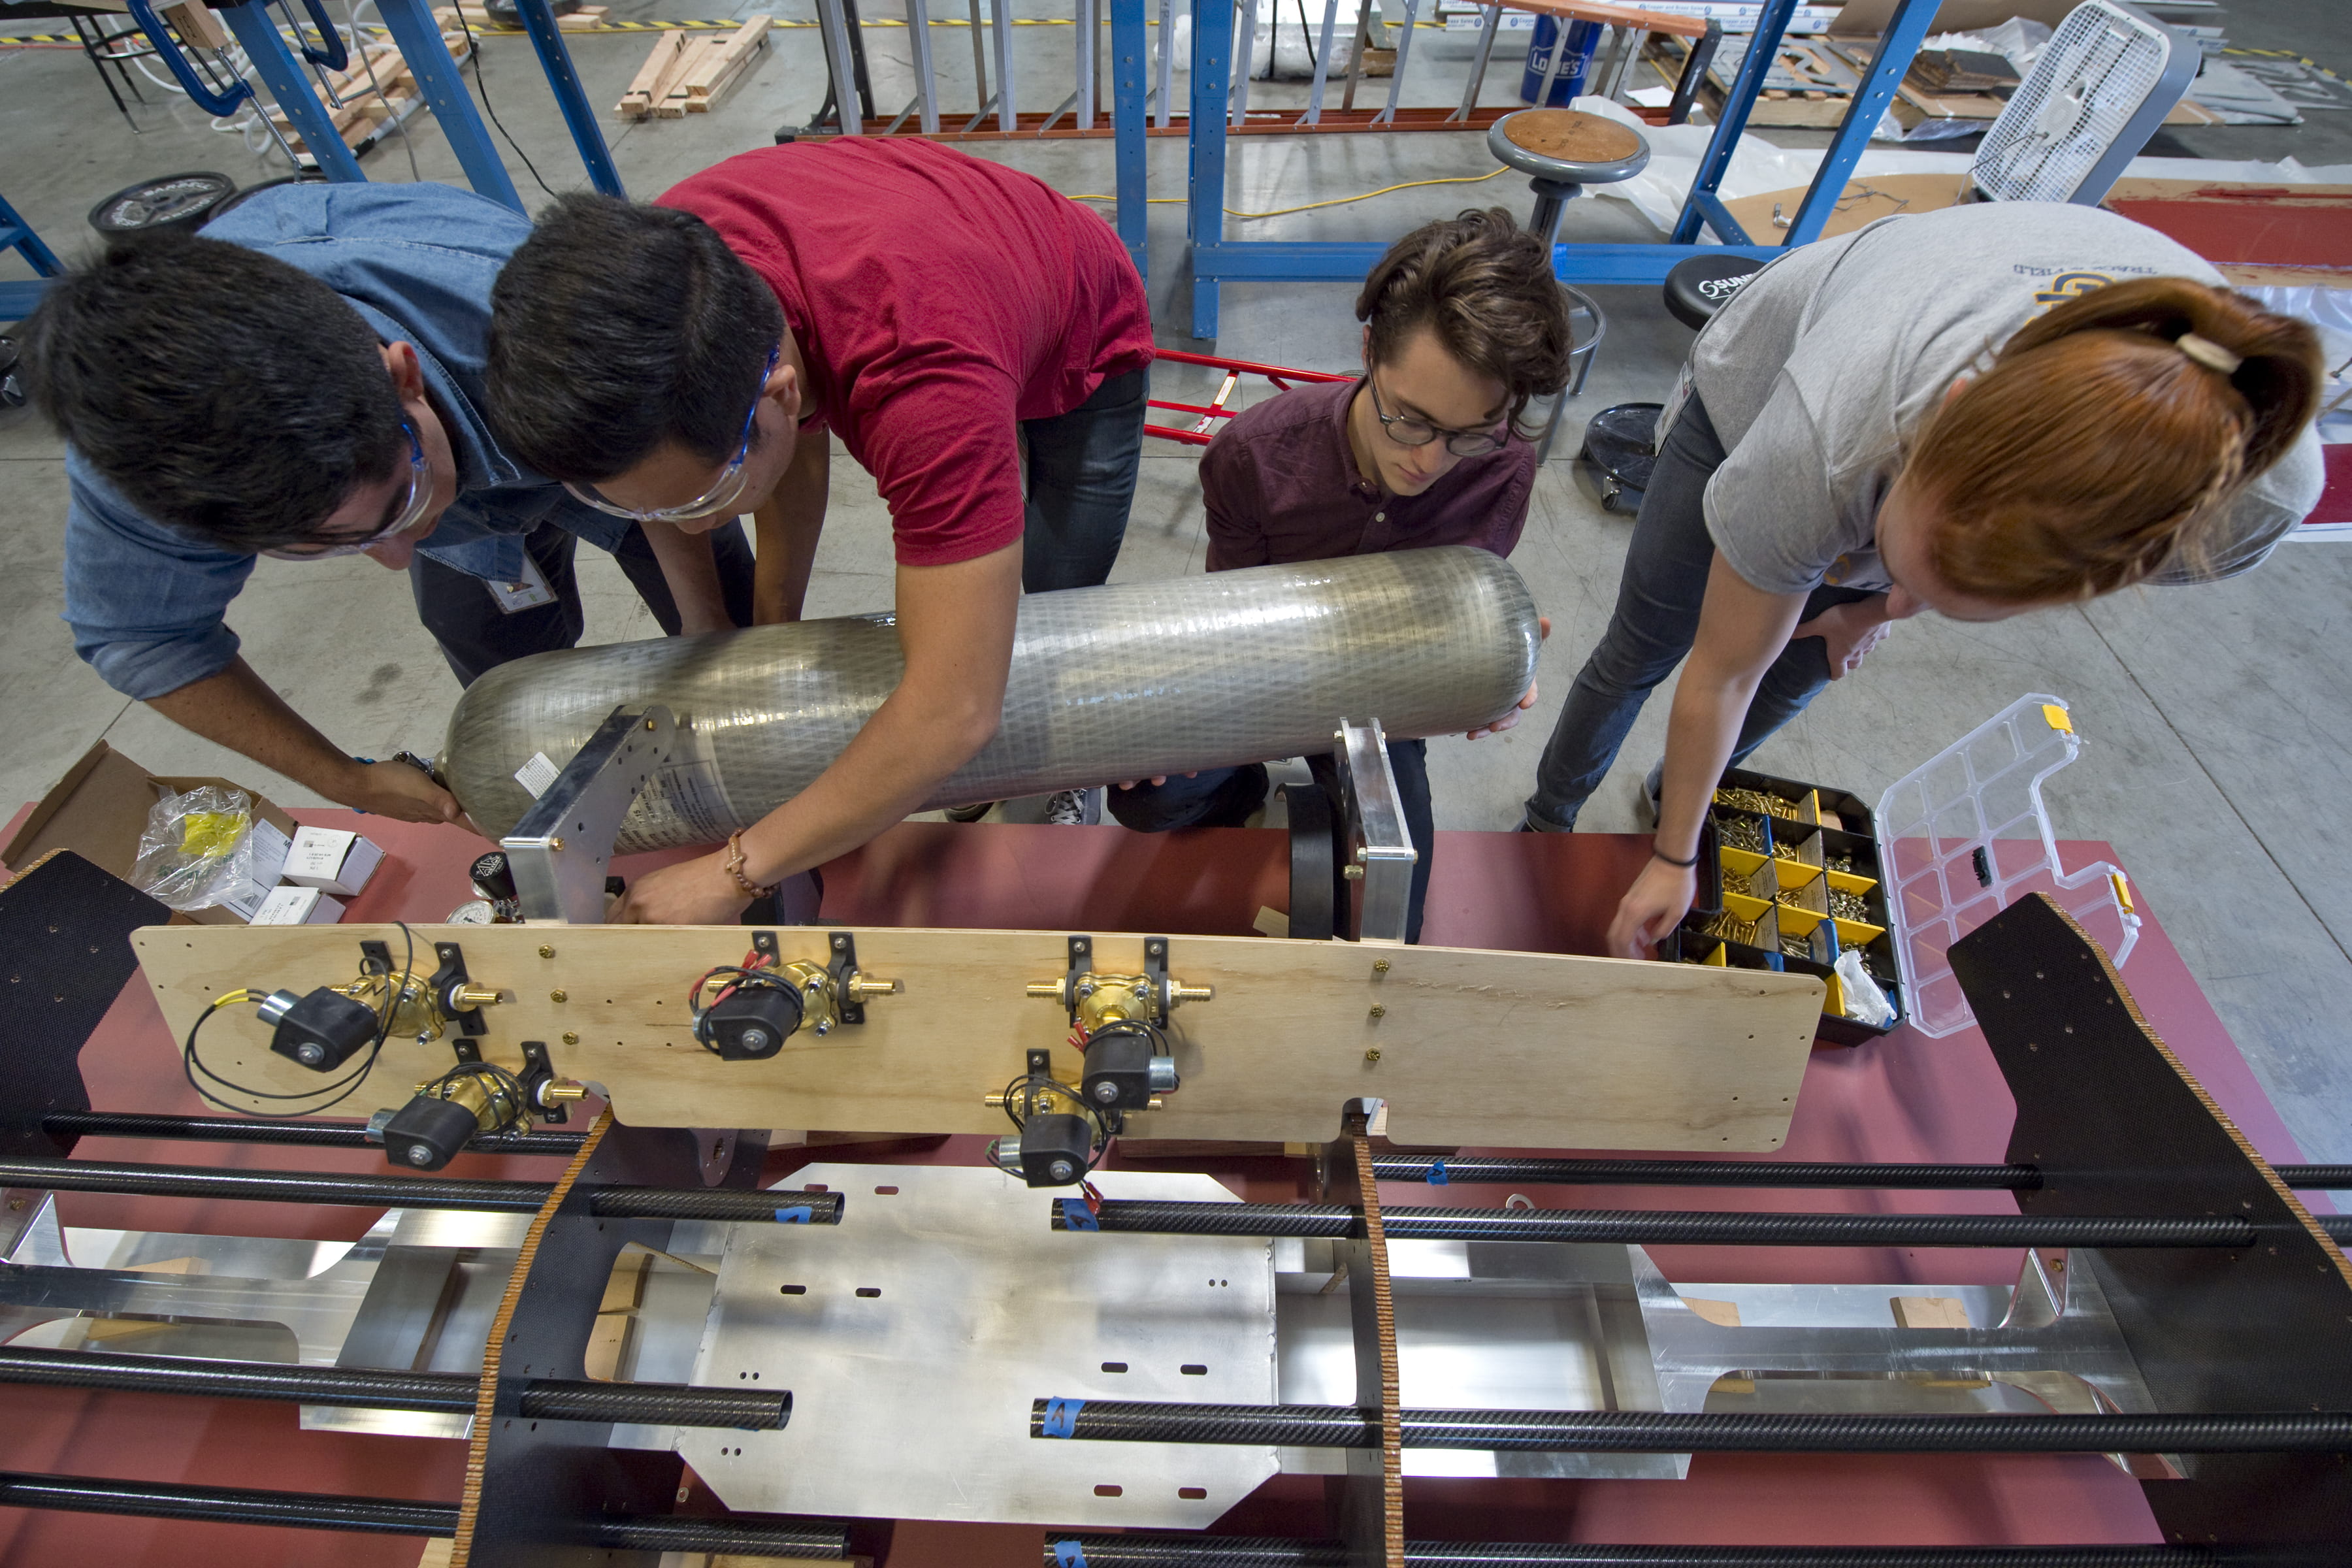 Guzman, Buenviaje, Guerrero and mechanical engineering senior Madelyn Sando (from left) fit an air tank into the pod.